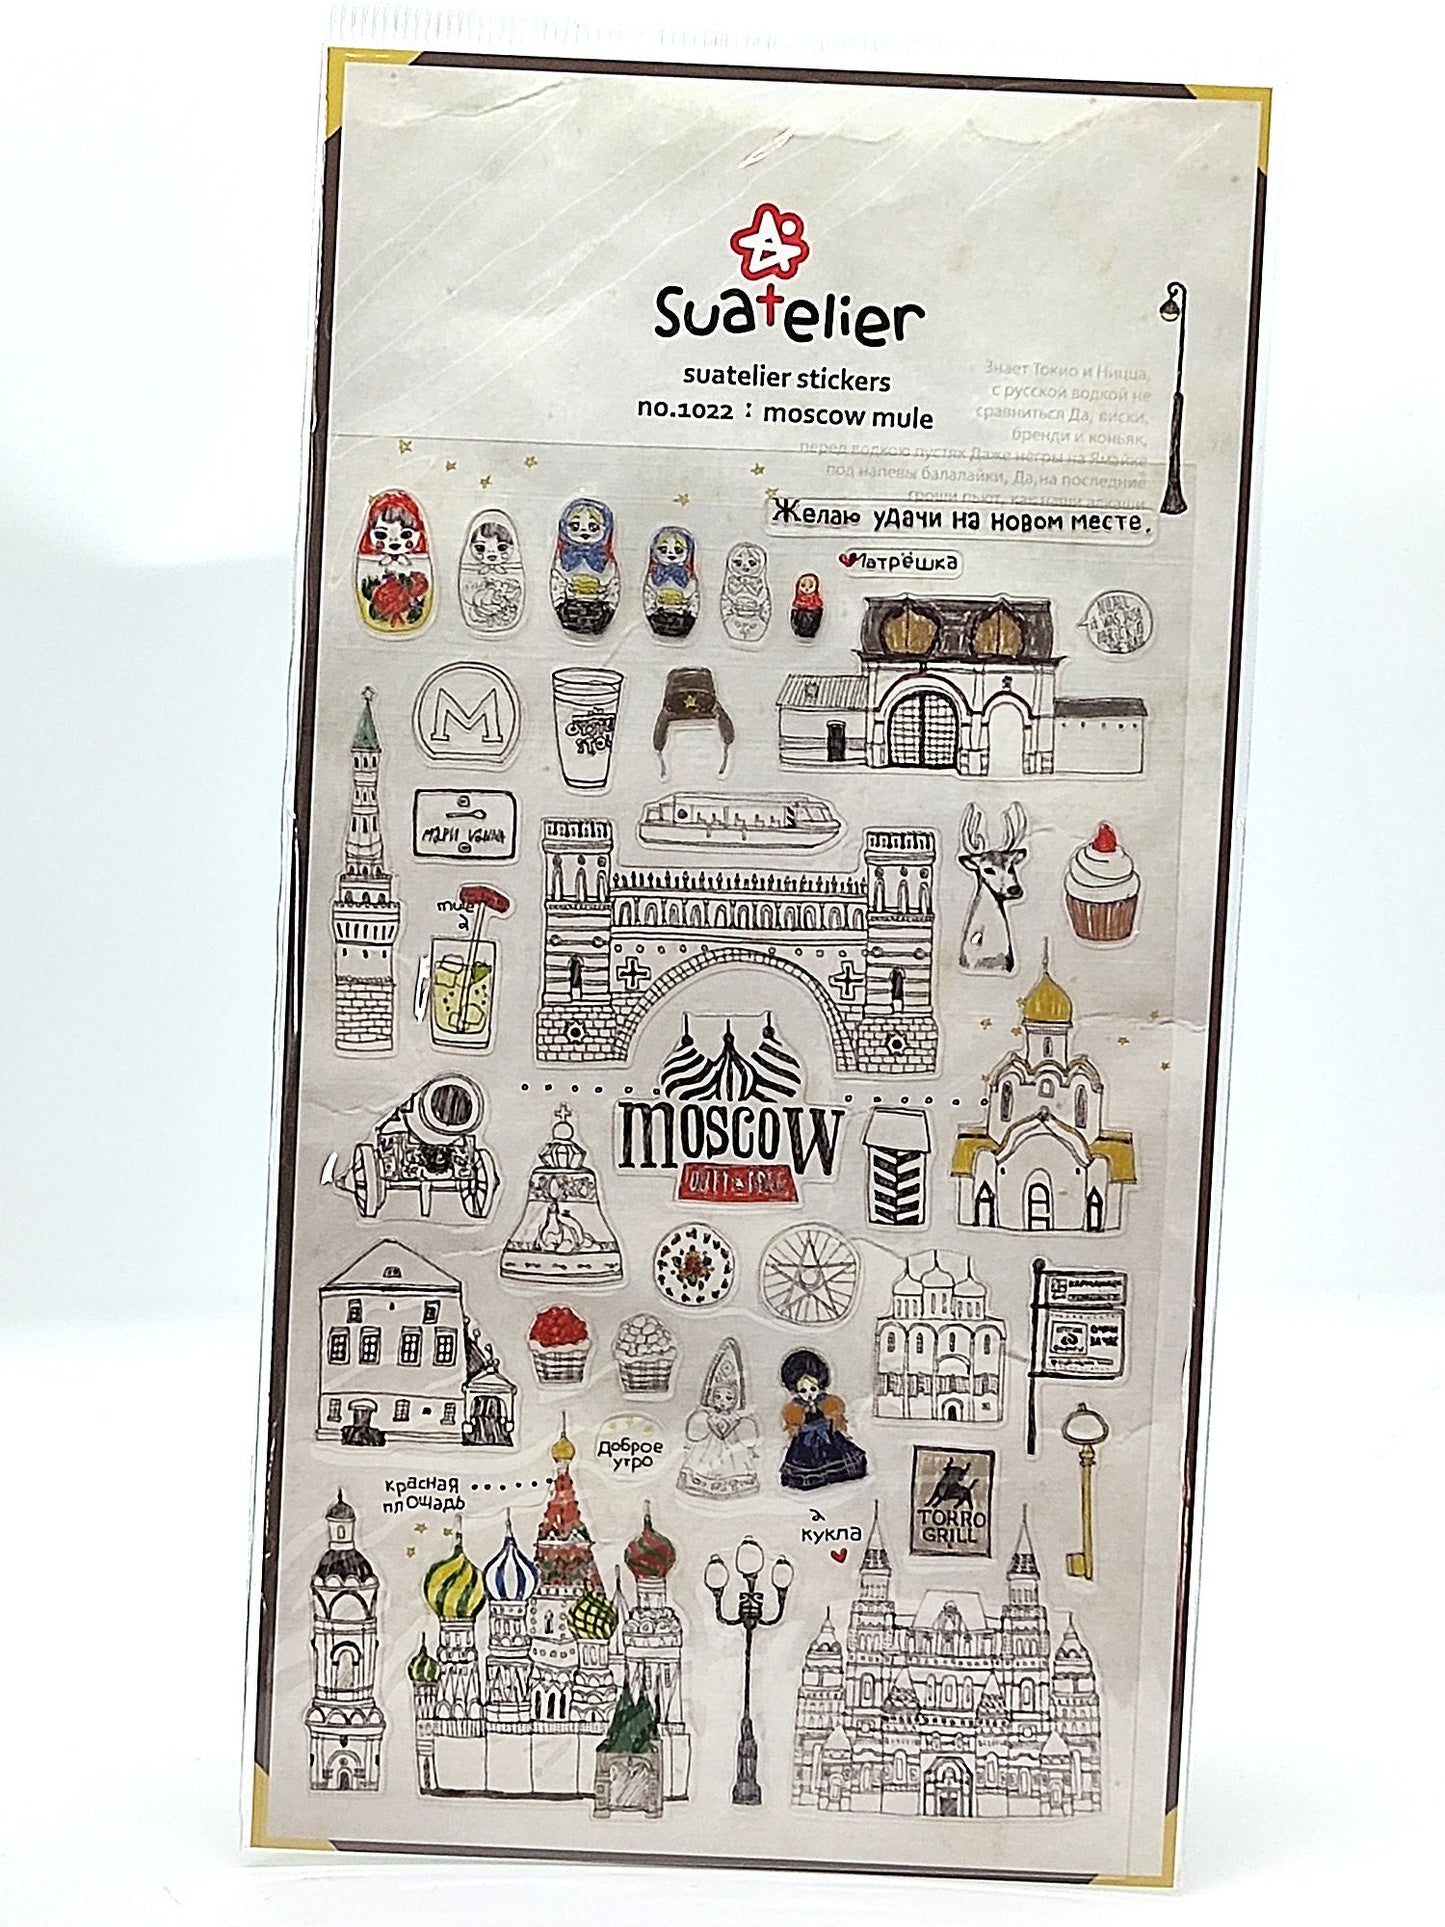 Suatelier Stickers| Travel themed Stickers for gifting, scrapbooking|Korean